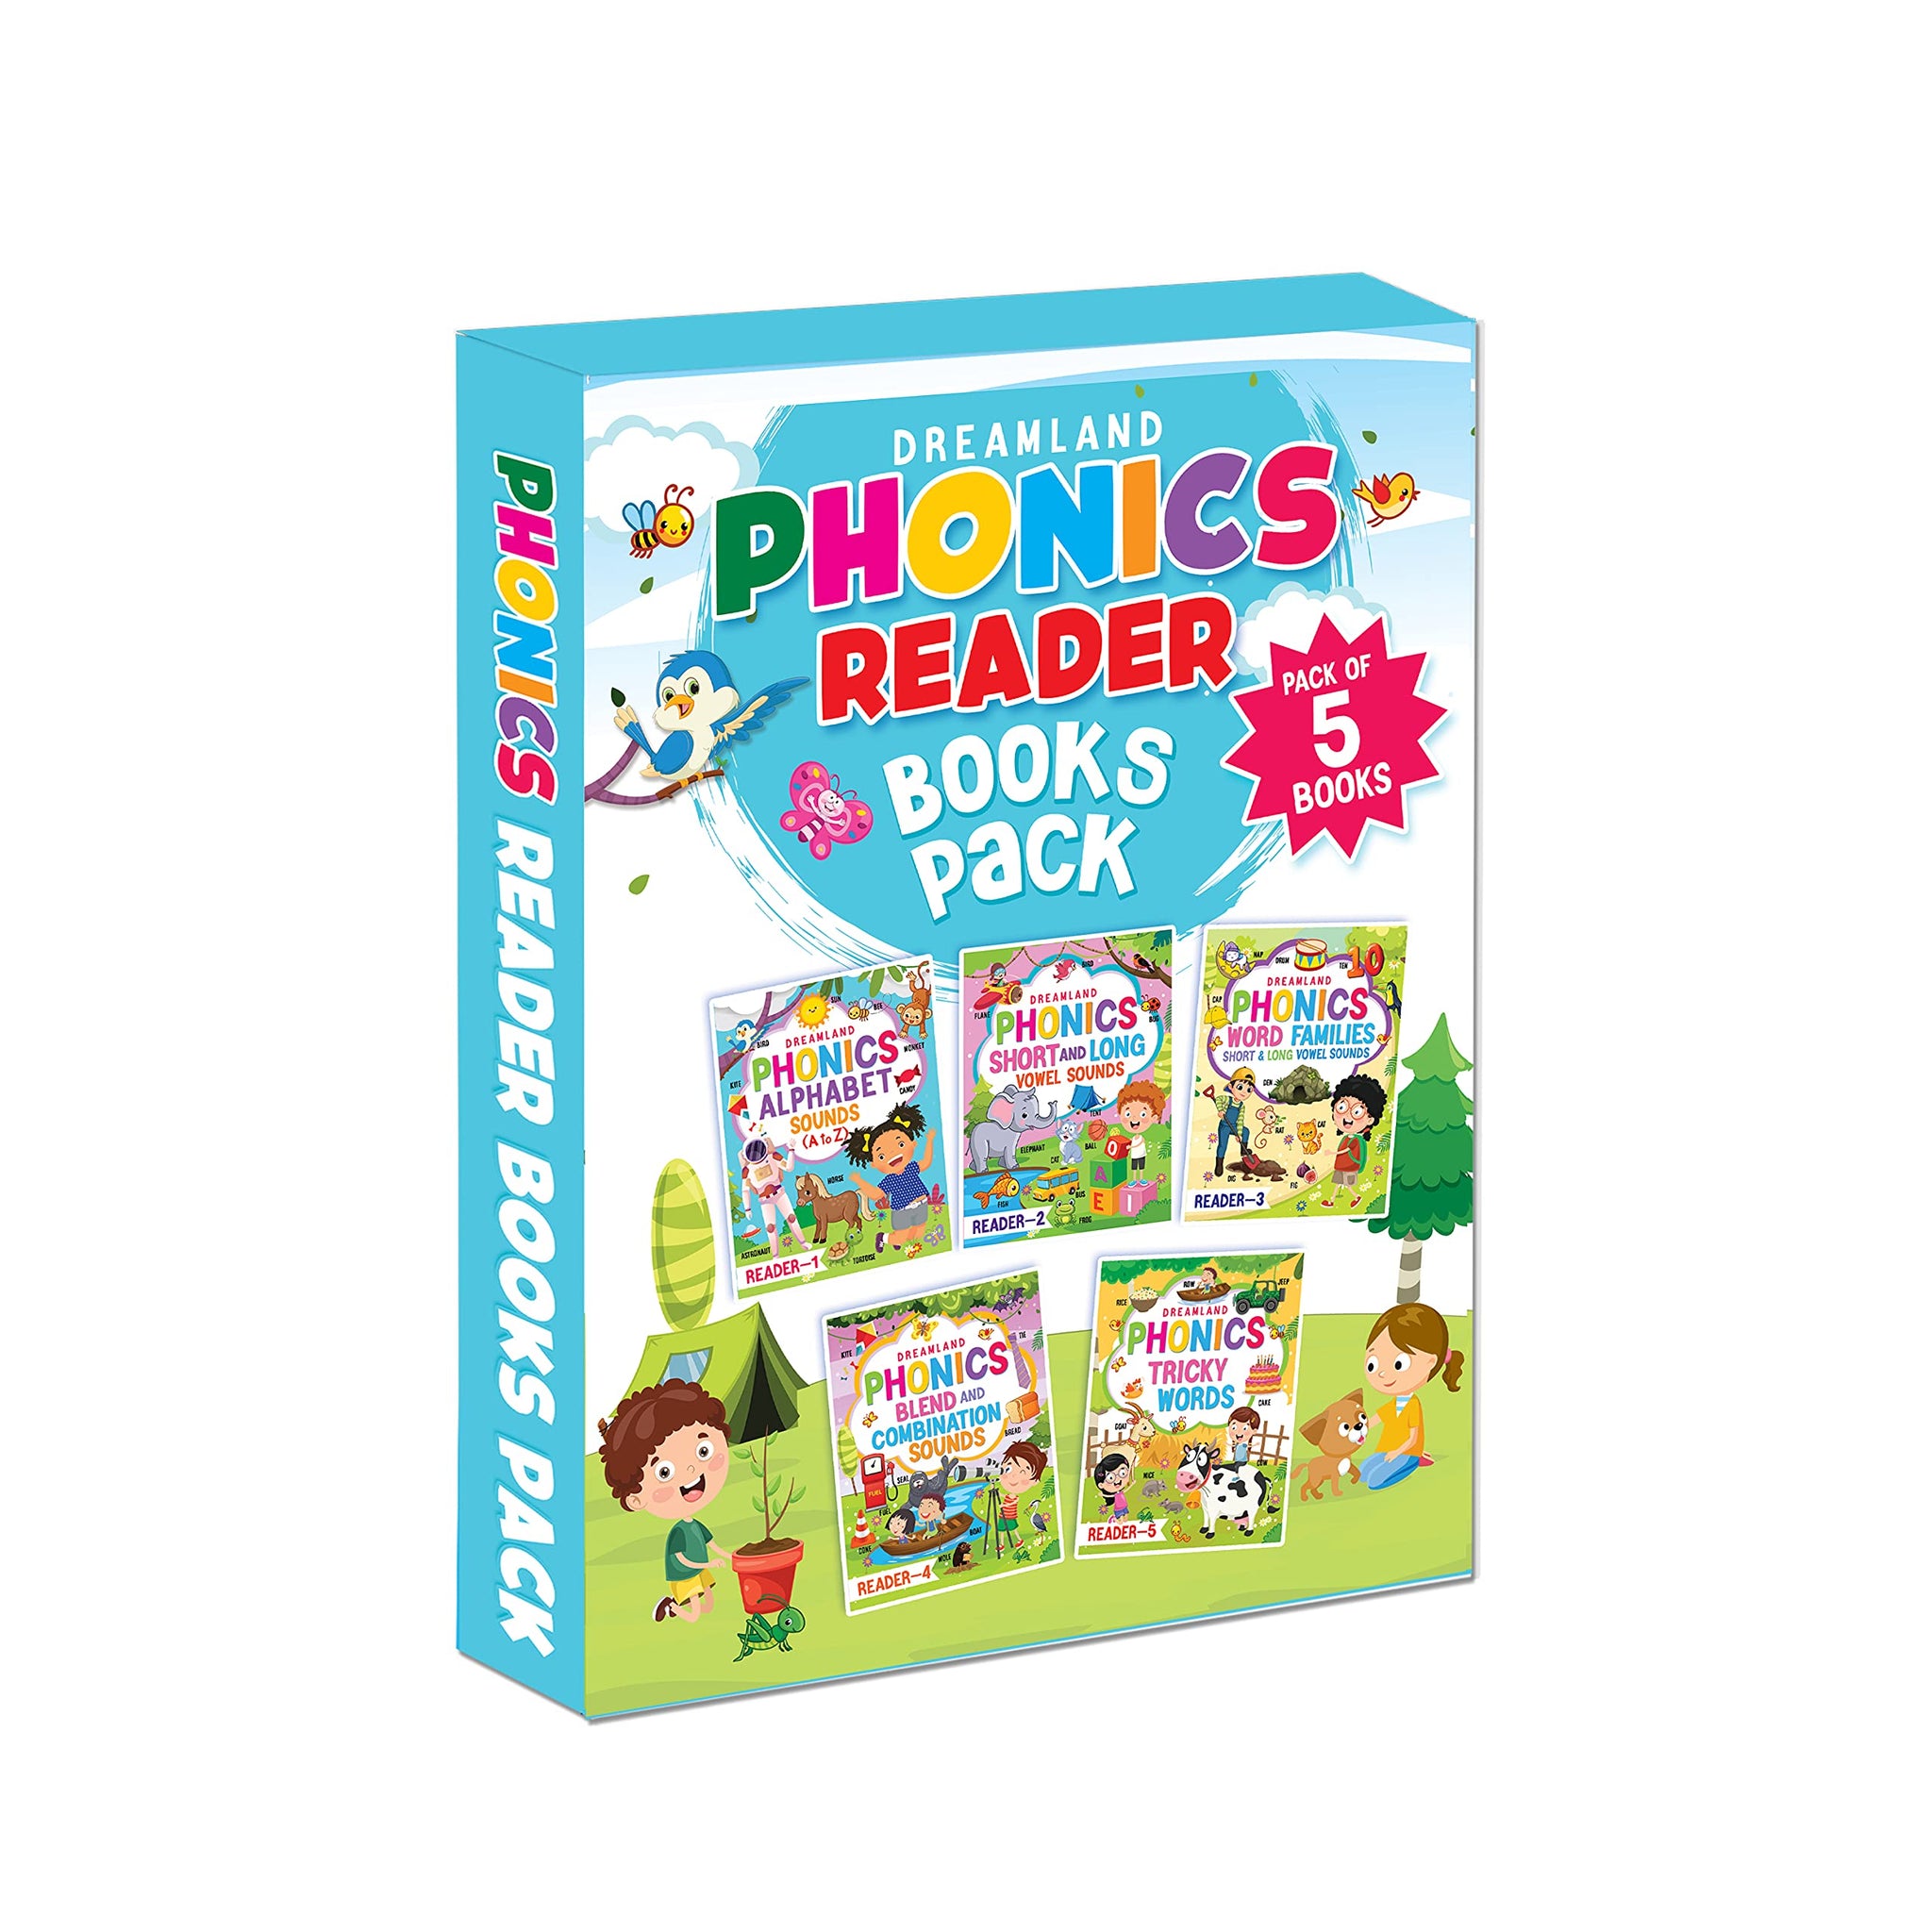 Phonics Reader 5 Books Pack for Children Age 3 -10 Years